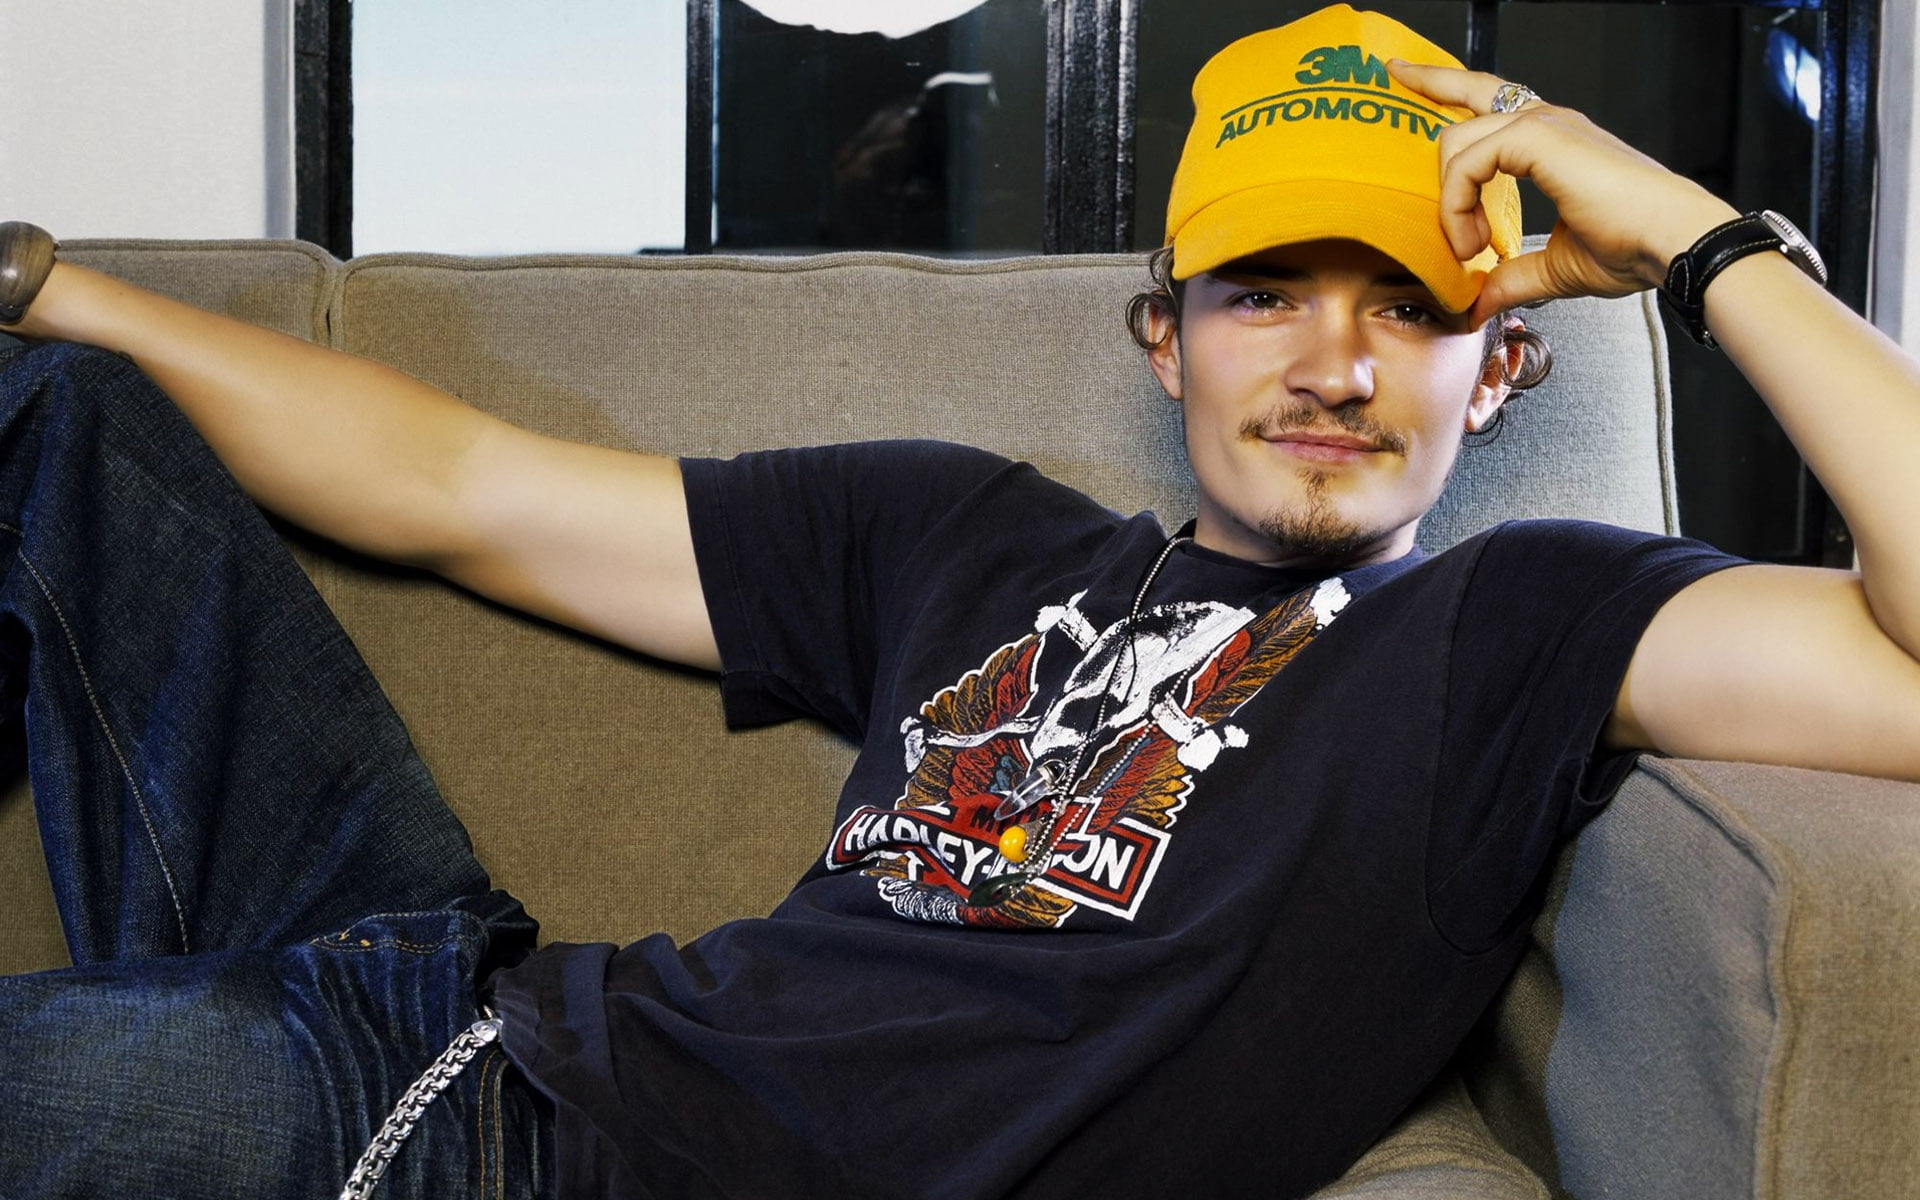 Orlando Bloom wearing a yellow cap while lying on the couch